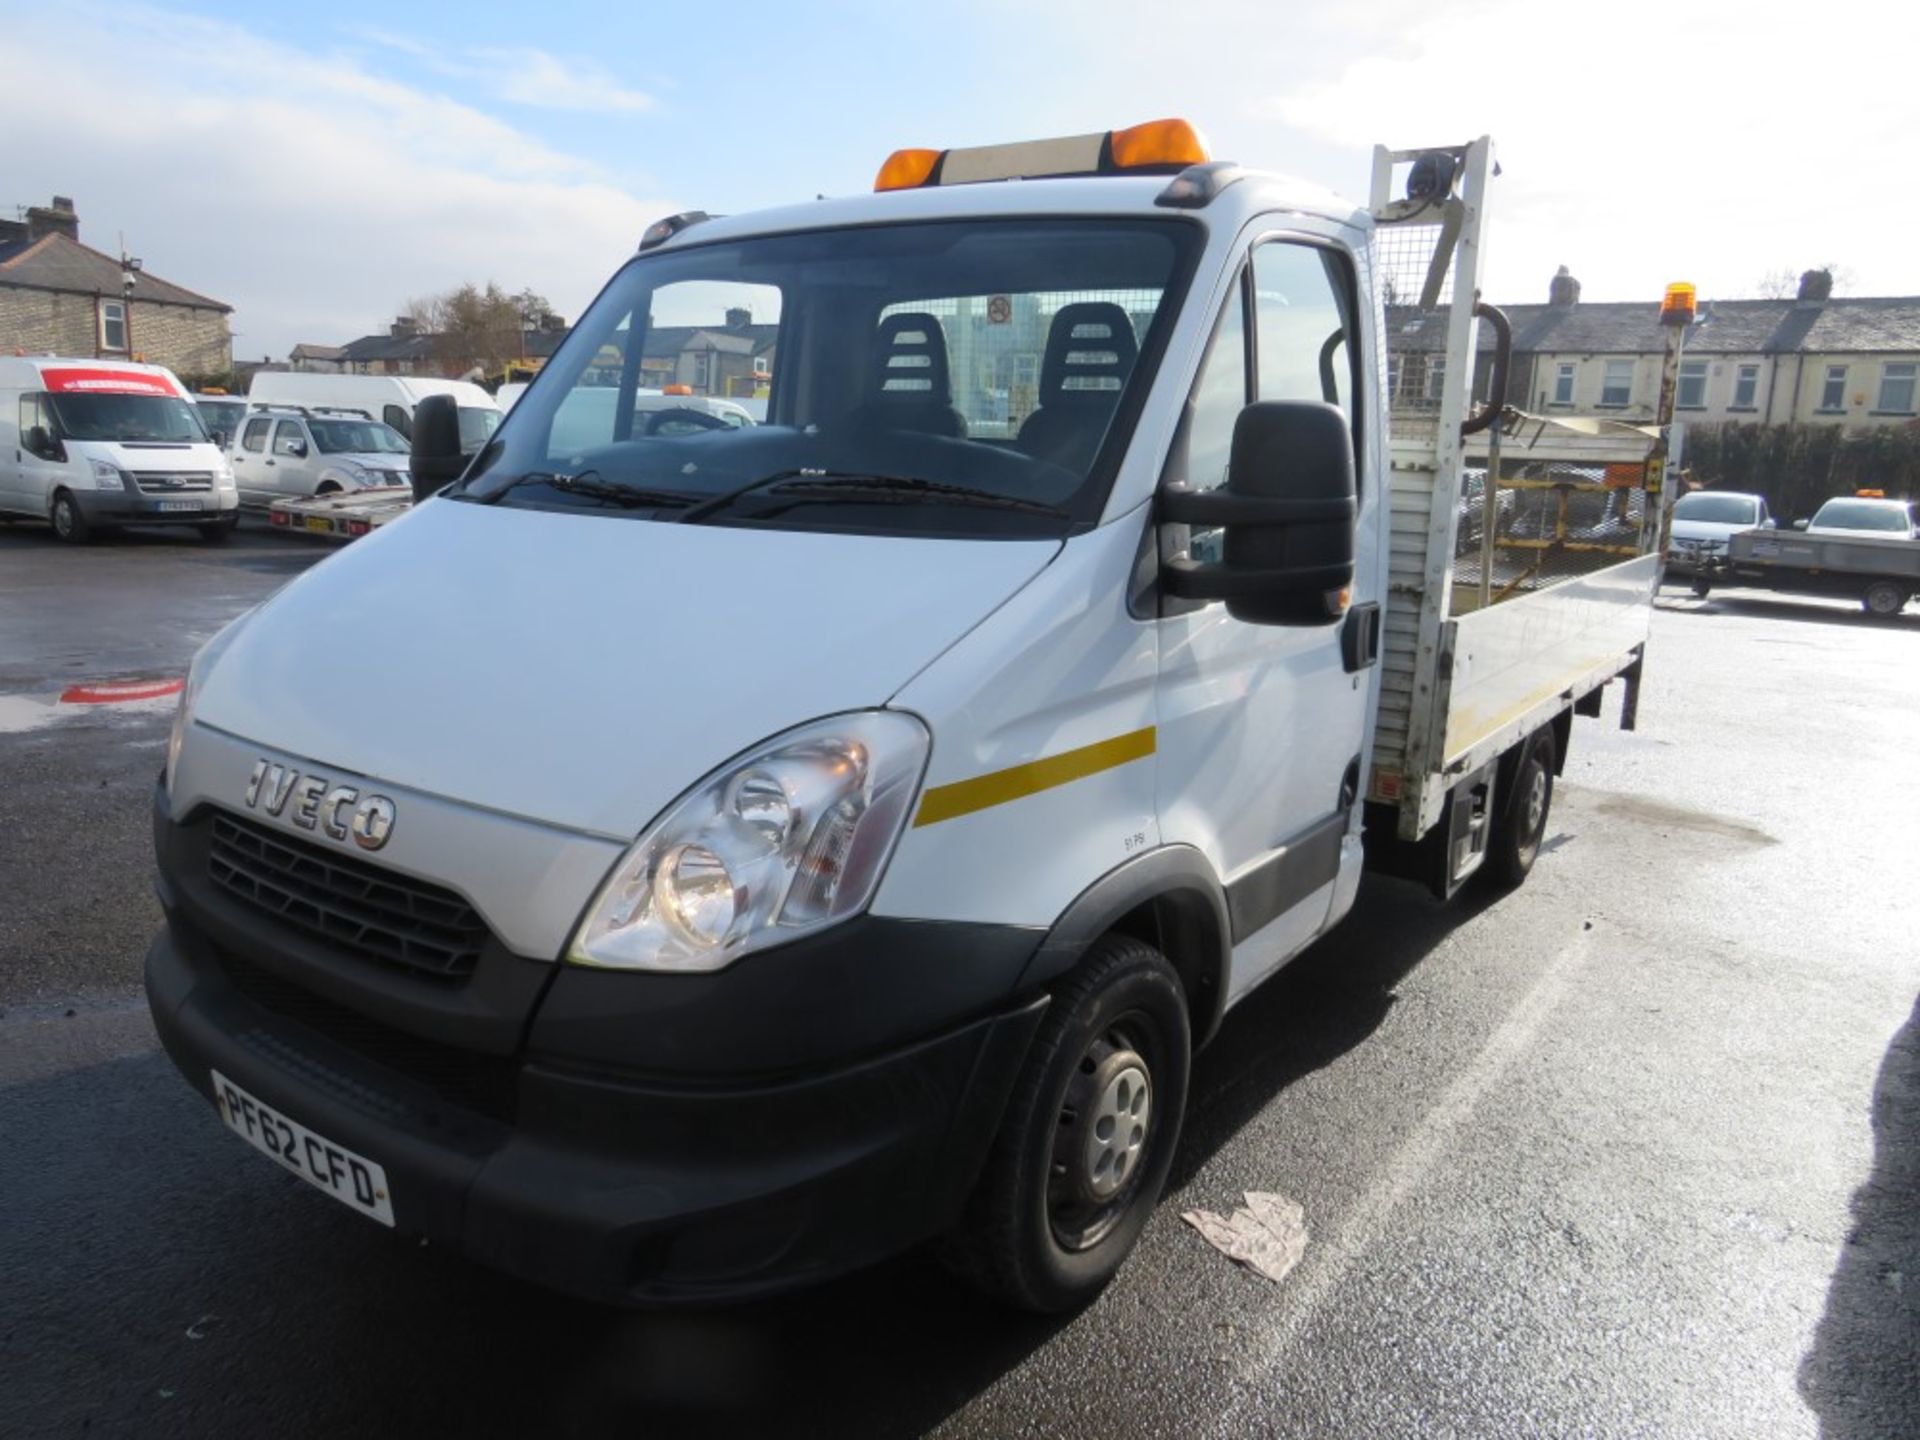 62 reg IVECO DAILY 35S13 DROPSIDE C/W TAIL LIFT, 1ST REG 02/13, TEST 03/22, 175886M WARRANTED, V5 - Image 2 of 6